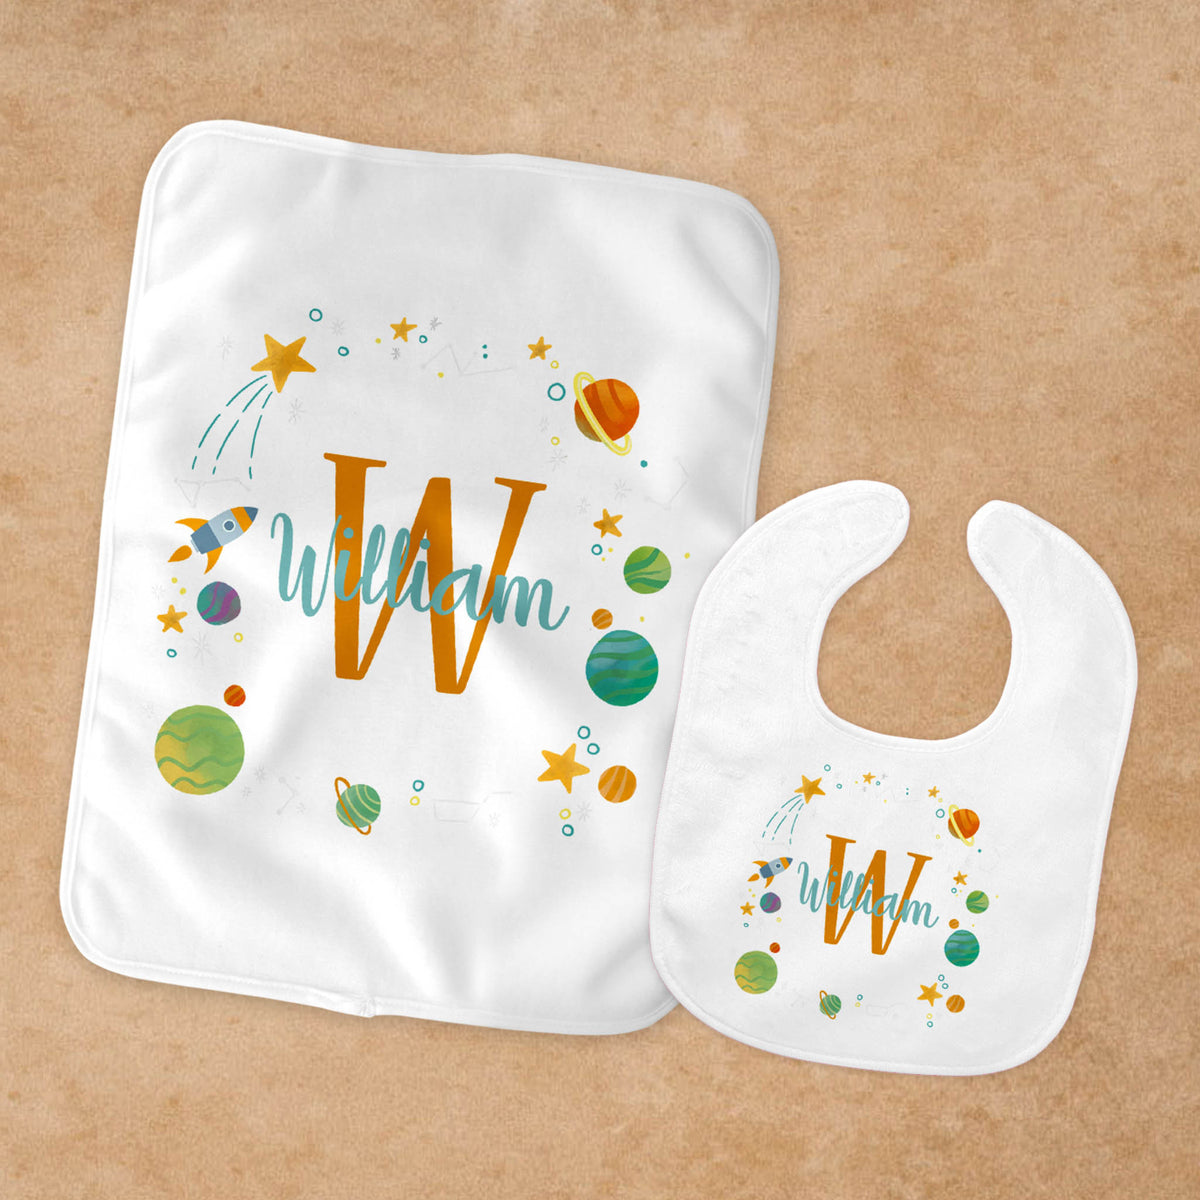 Personalized Burp Cloth | Custom Baby Gifts | Baby Shower | Outerspace